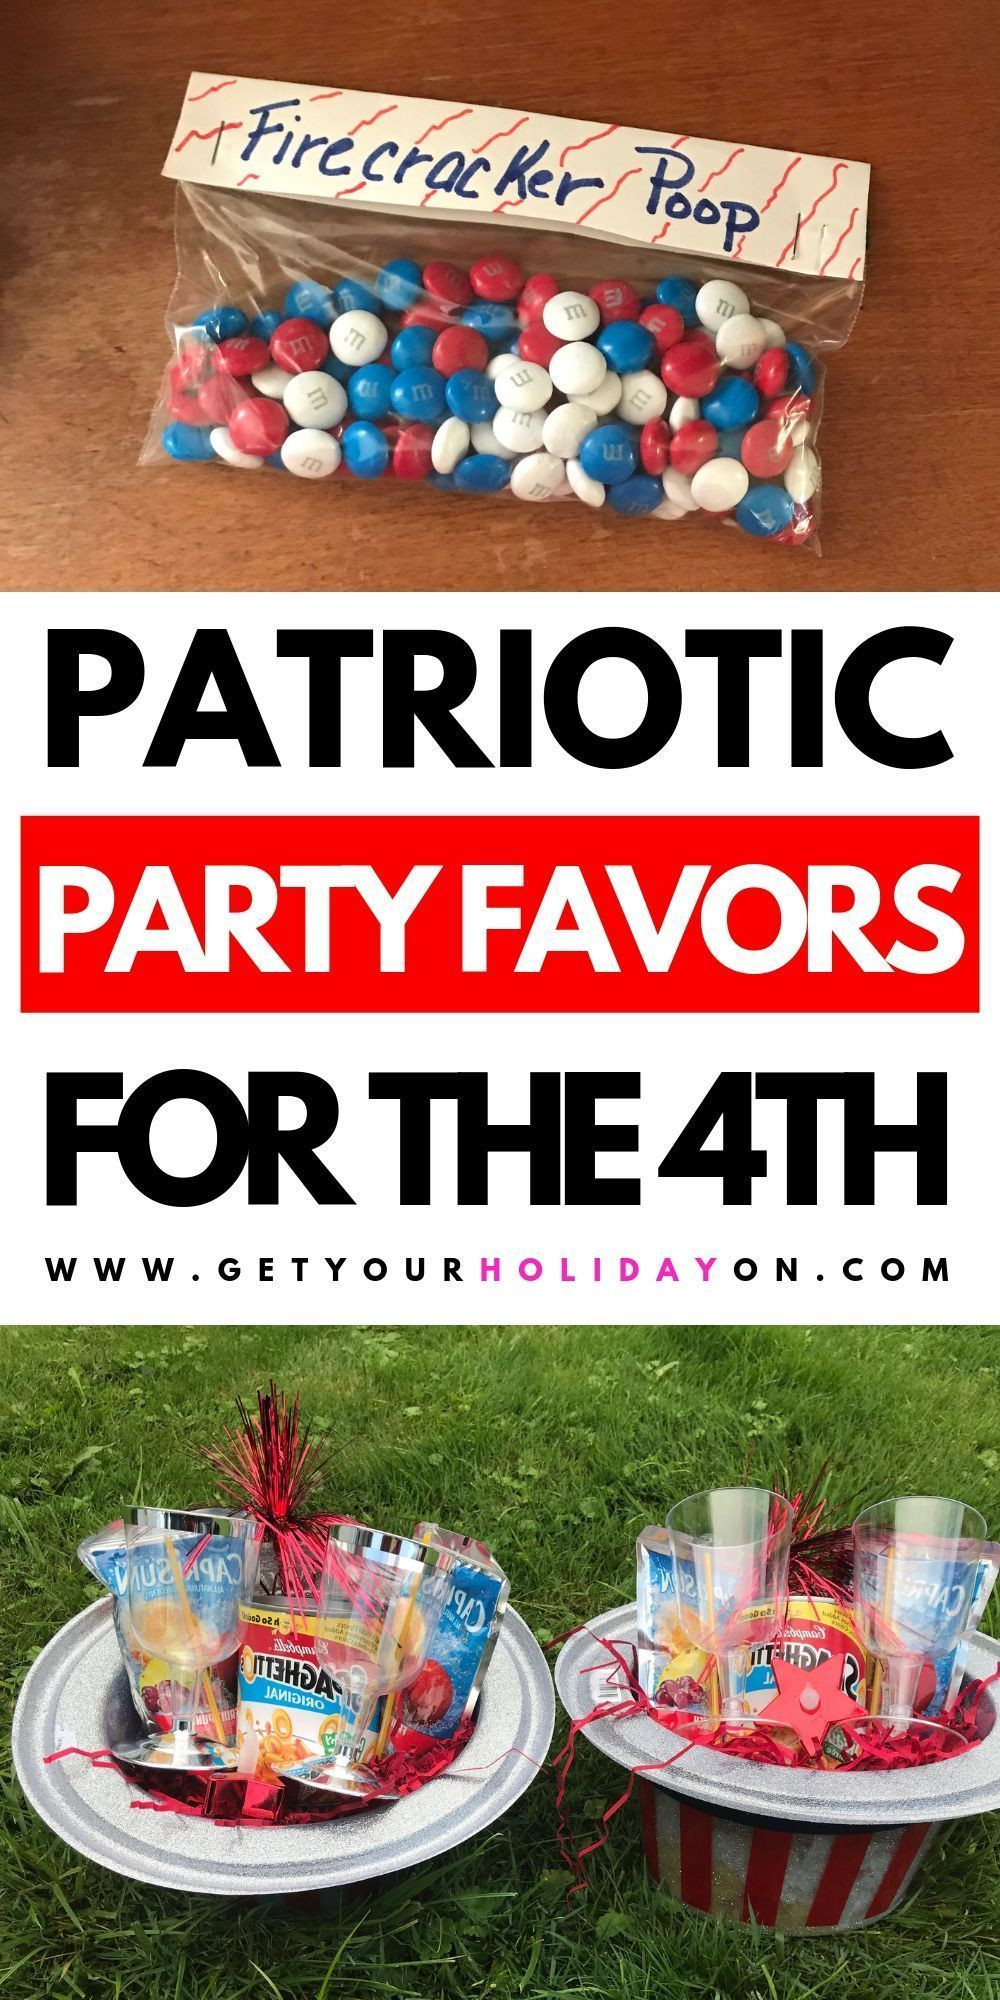 4th Of July Party Ideas For Adults
 FOURTH OF JULY PARTY FAVORS FOR KIDS AND ADULTS